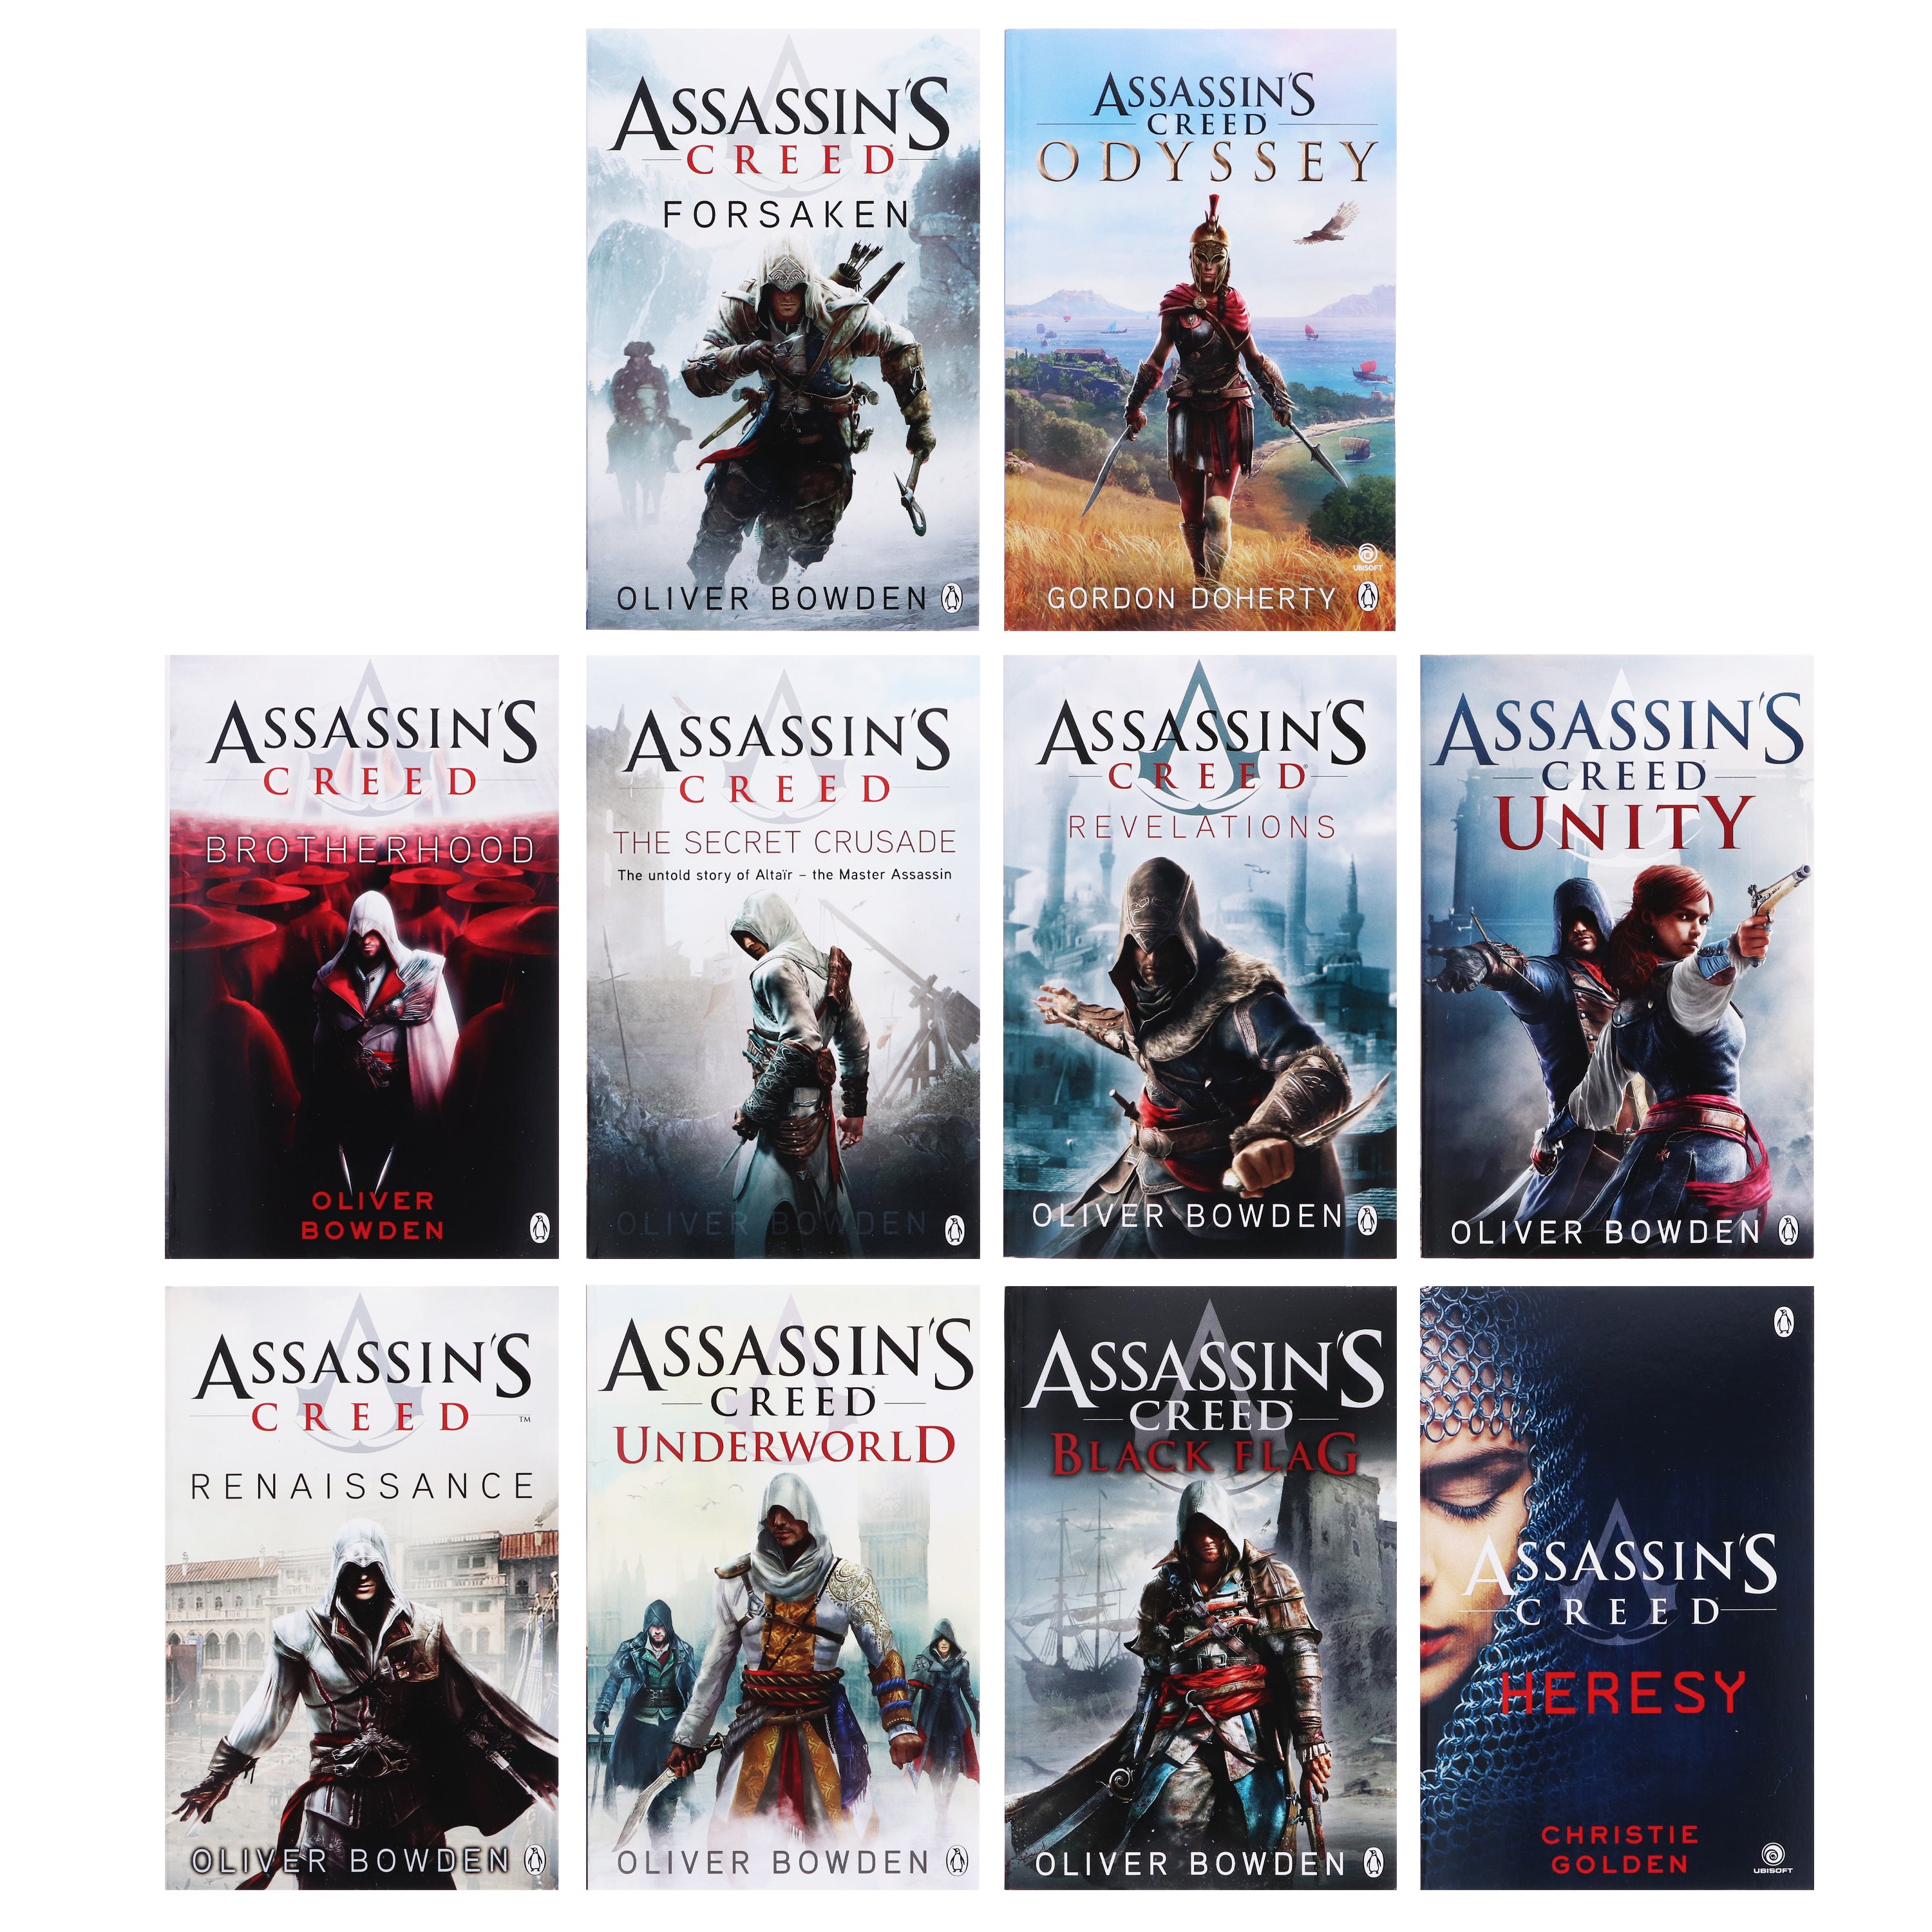 Assassins Creed 1-10 Books Collection By Oliver Bowden - Fiction